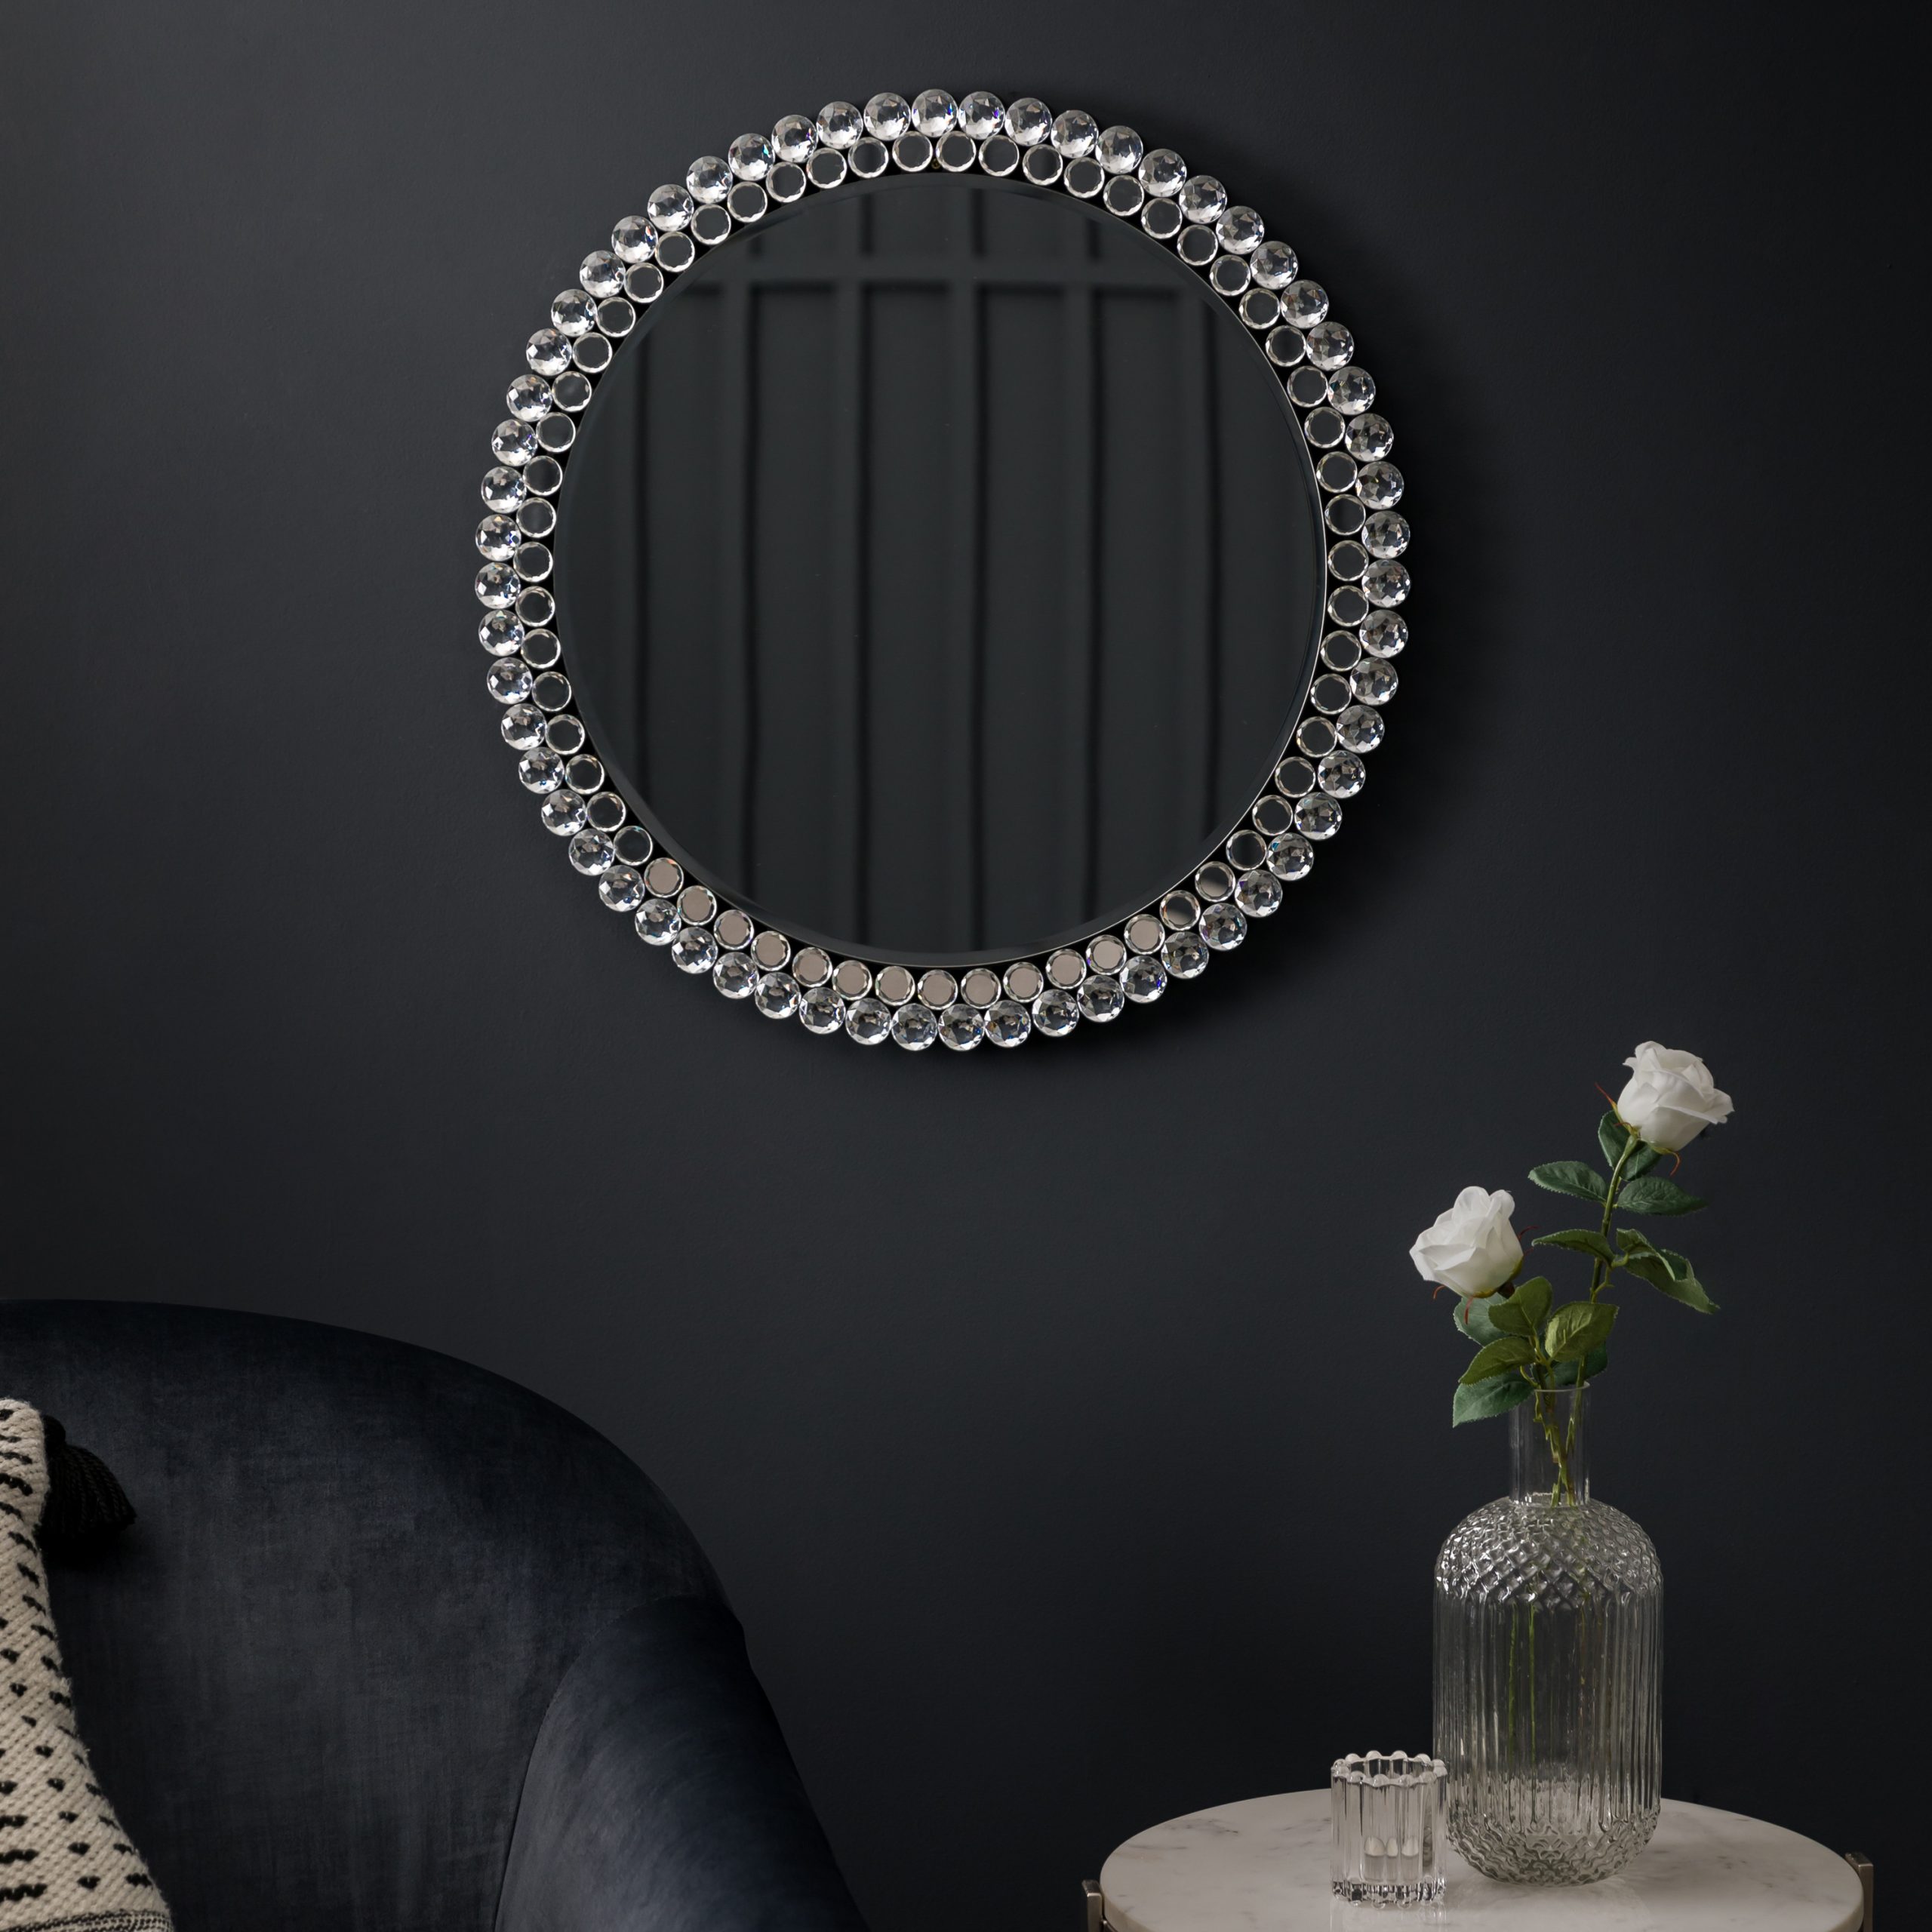 Gallery Direct Fallon Round Mirror | Shackletons